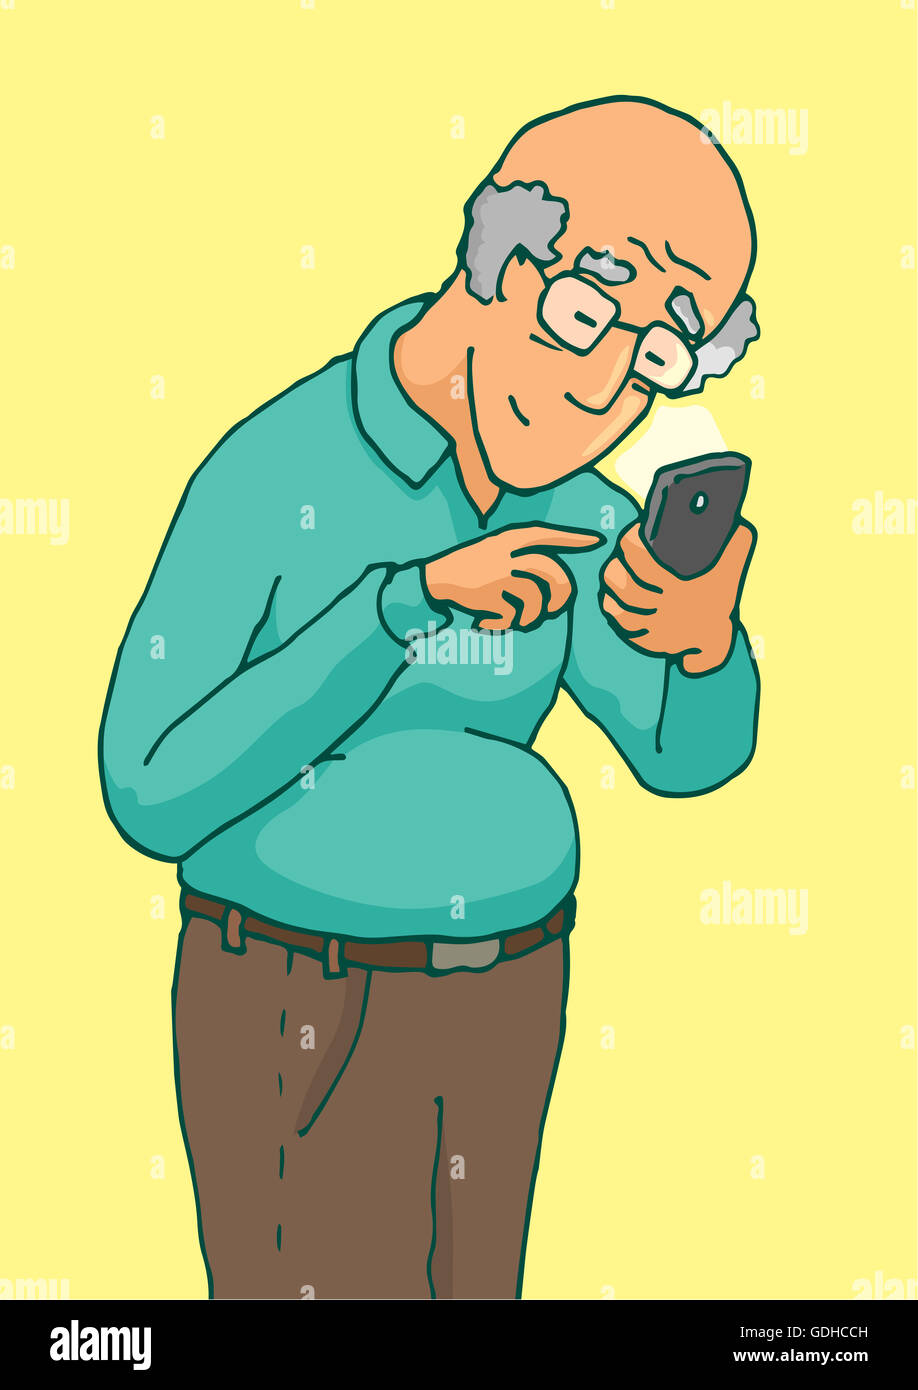 Cartoon illustration of an active senior using his smartphone with touchscreen Stock Photo